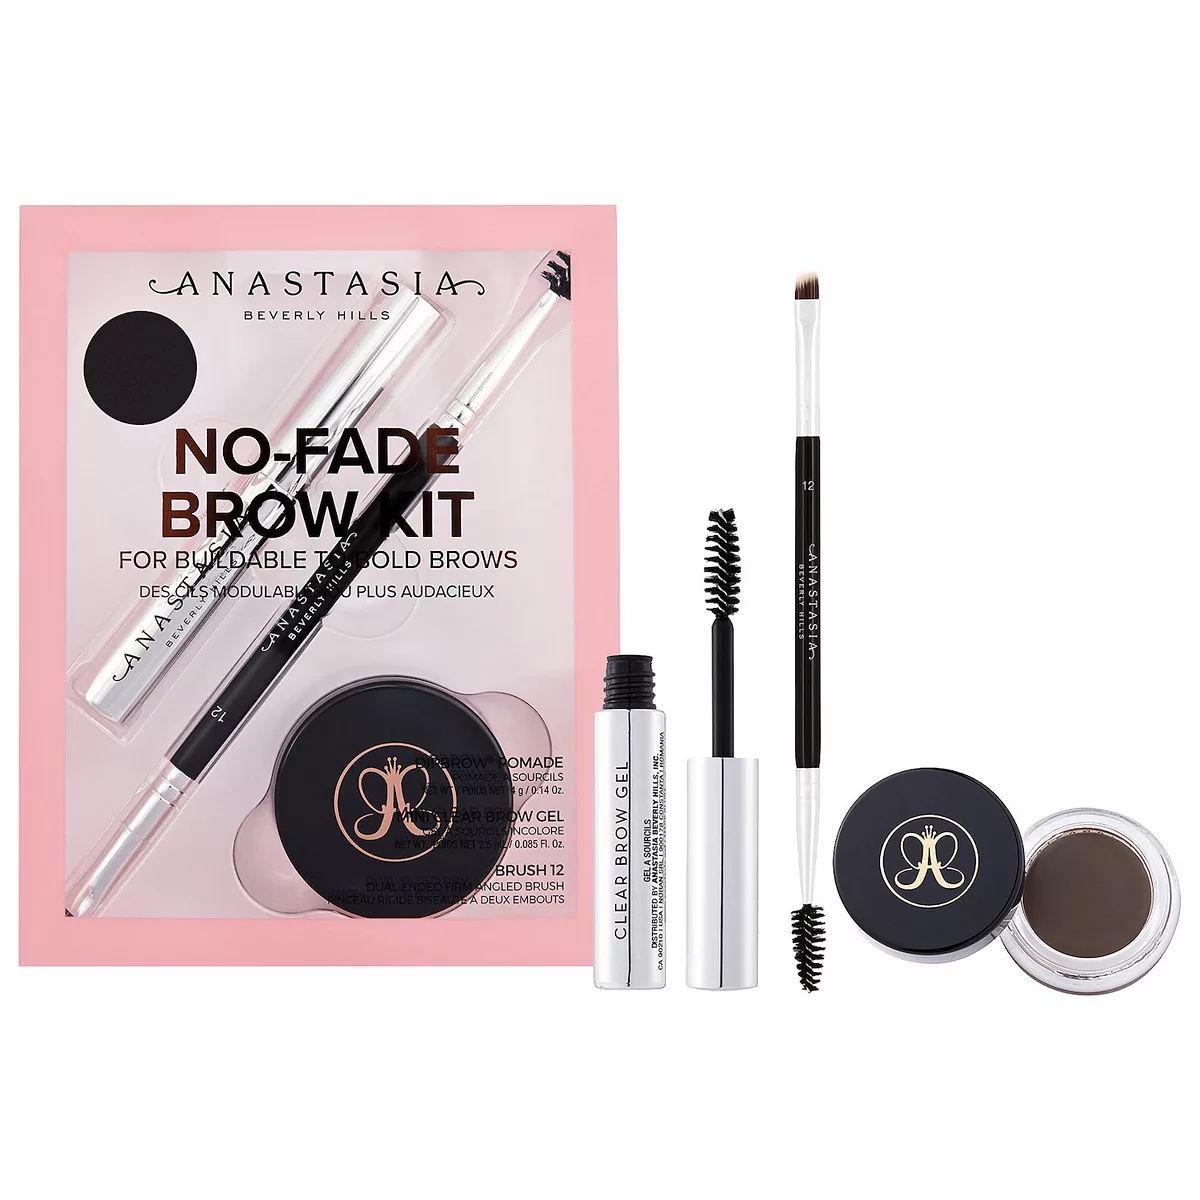 Anastasia Beverly Hills No-Fade Brow Kit for Buildable to Bold Brows | Kohl's